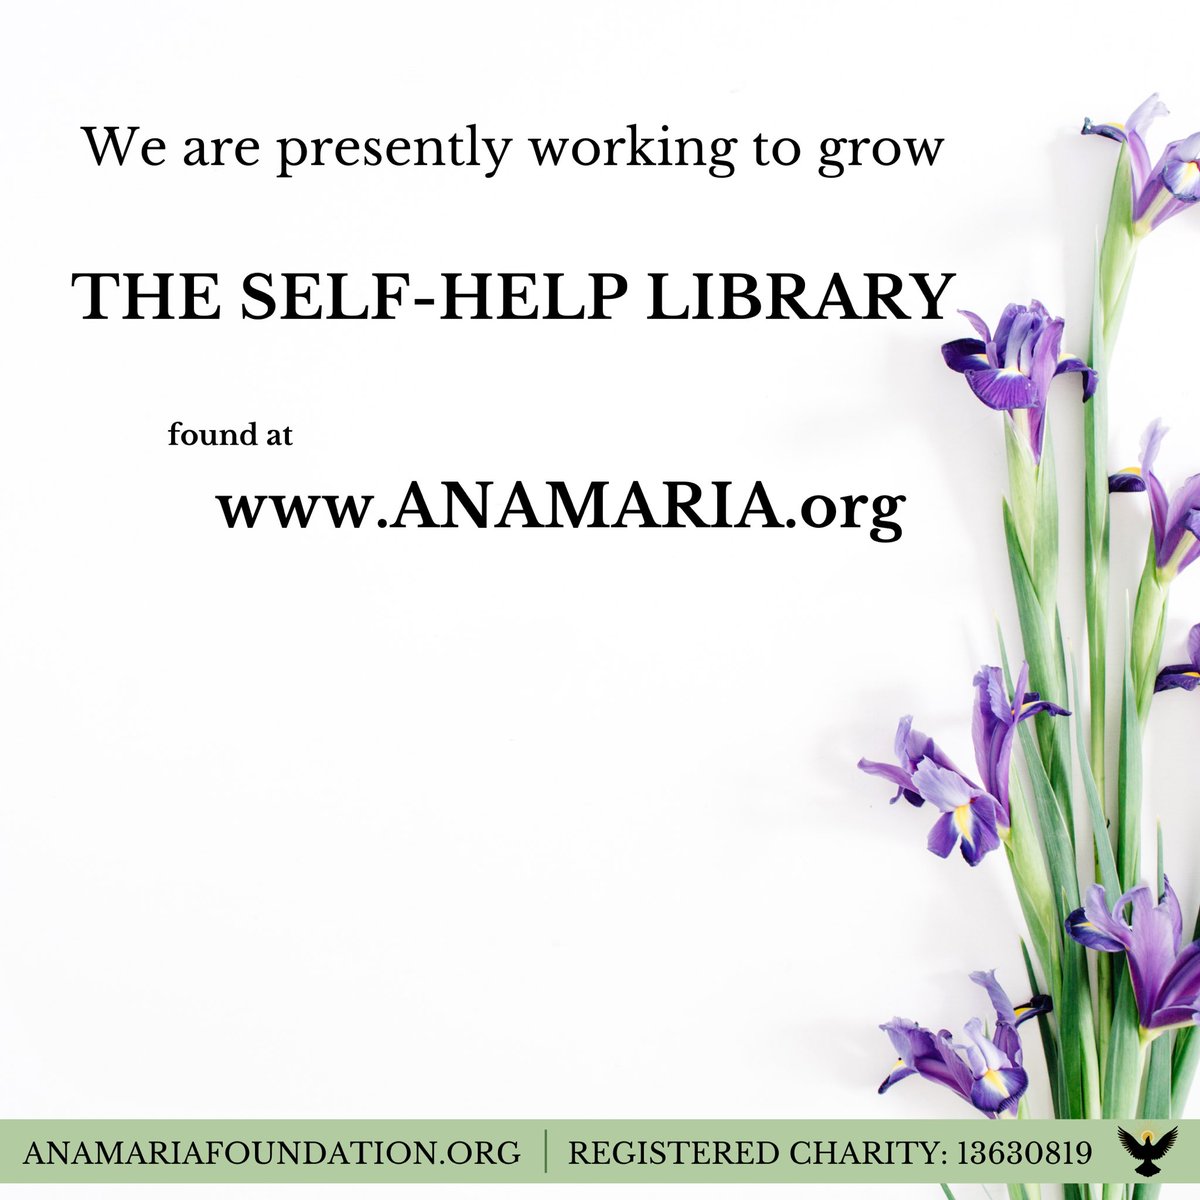 The Self-Help Library is a place to go while waiting for treatment, it can be utilised in pre-recovery periods, to sustain a recovery, or to interrupt a relapse pattern. #anamariafoundation #anamariasantuario #faithinchange #charity #mentalhealth #selfhelp #selfcare #keepfaith